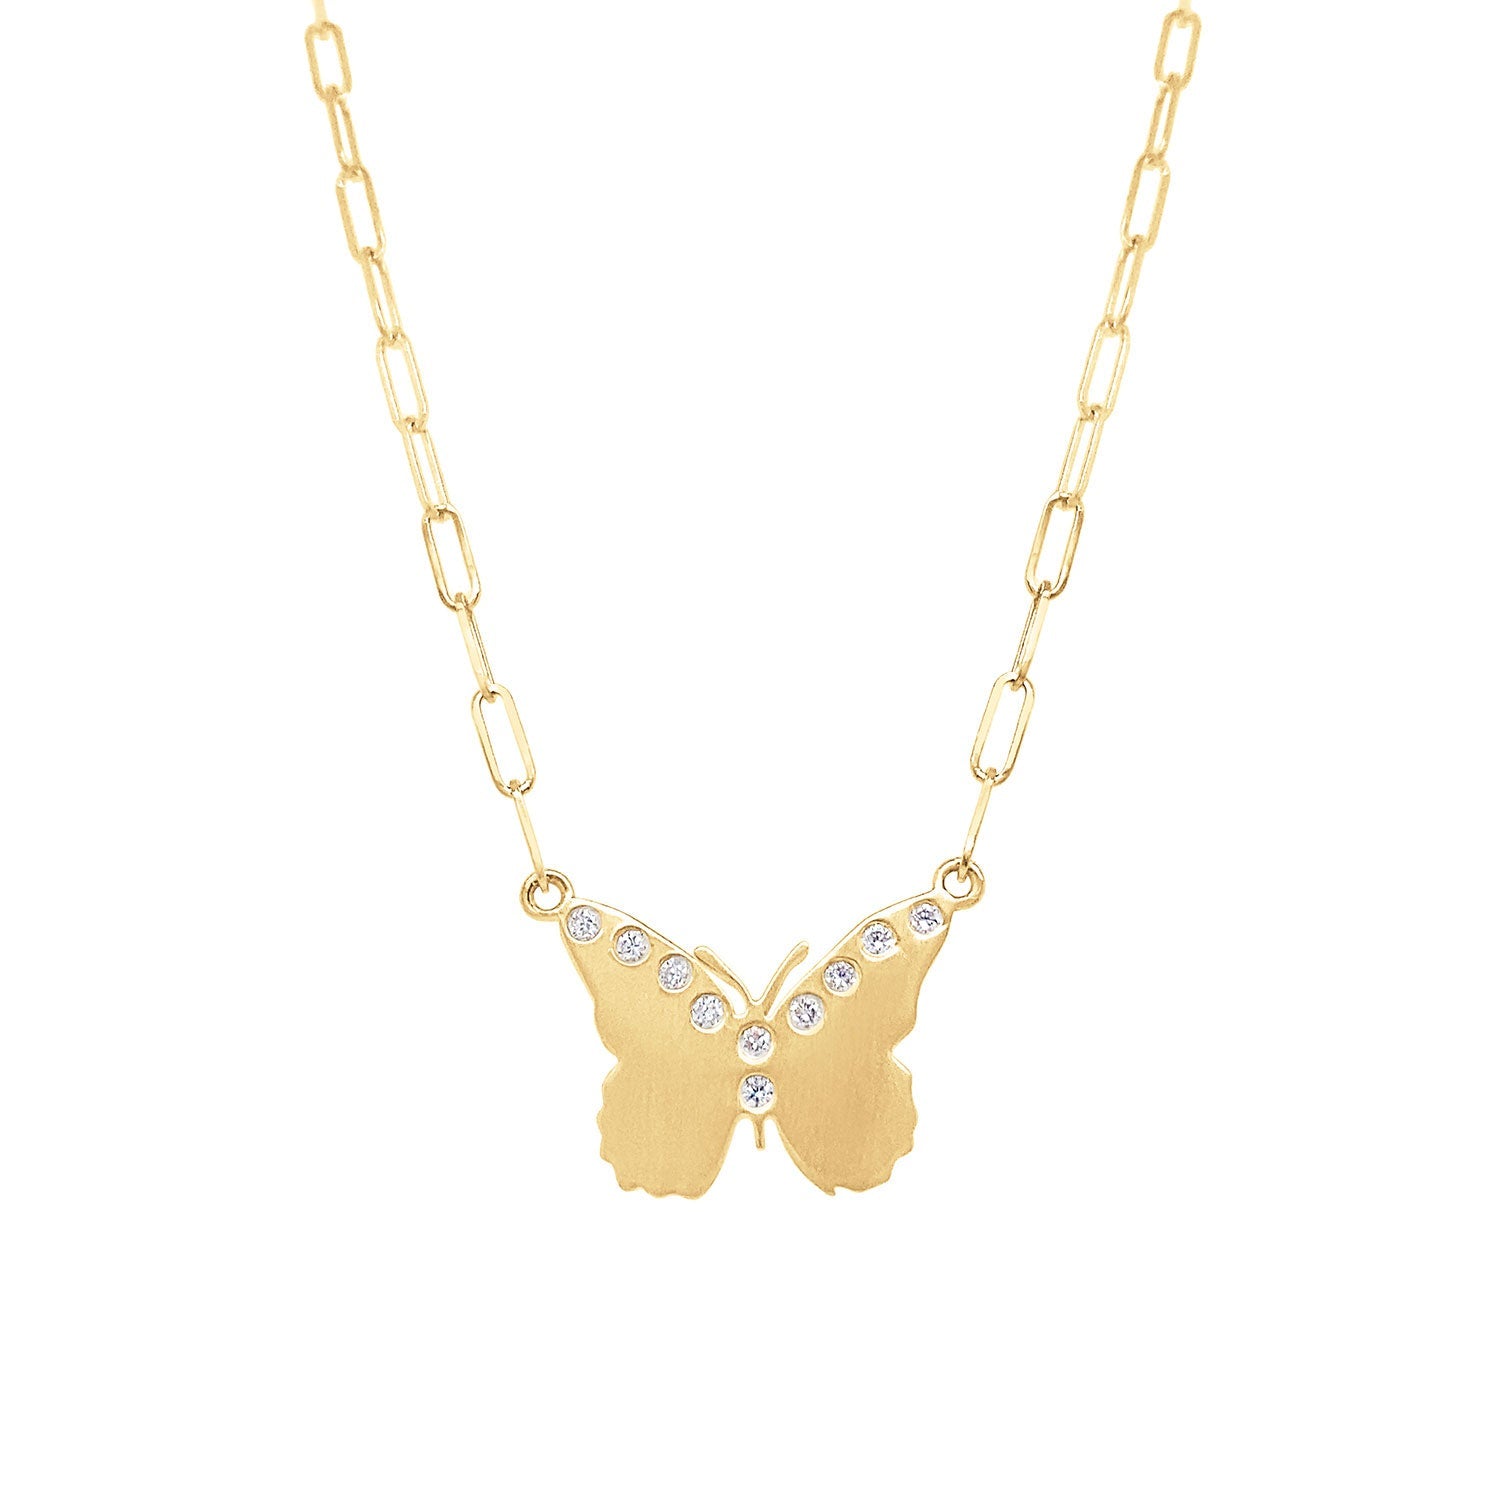 Evie Small Butterfly Necklace